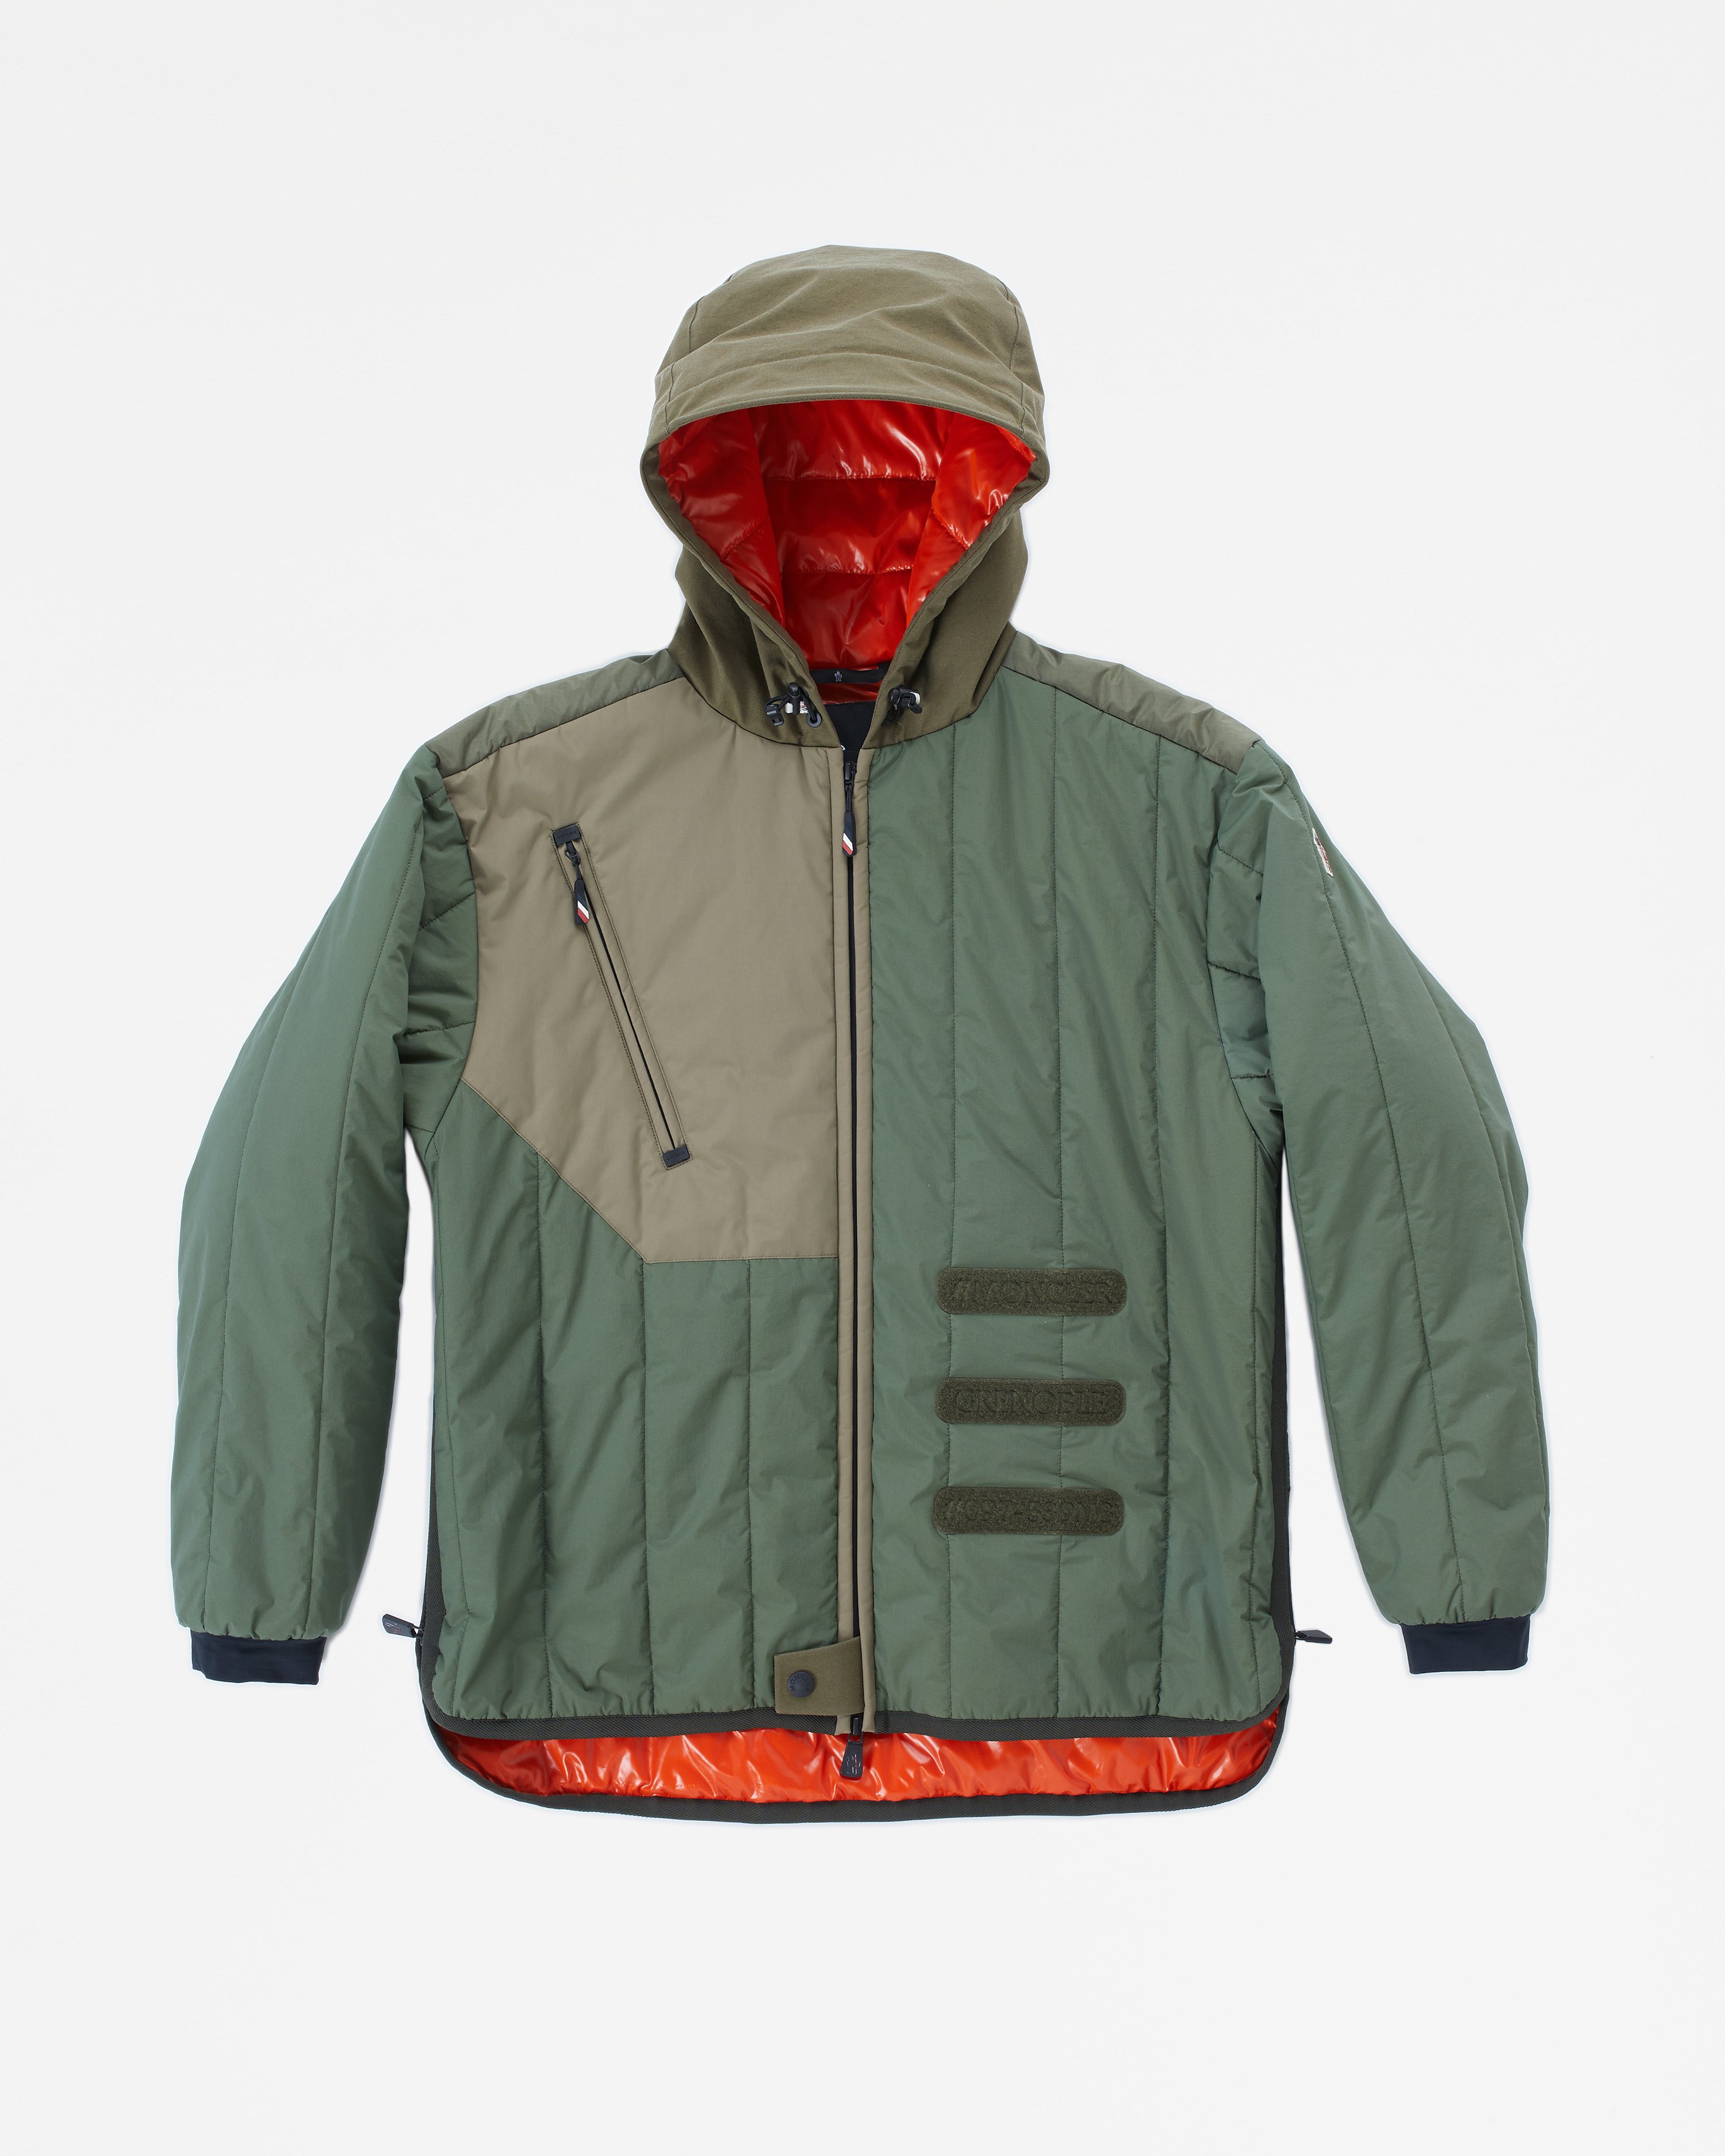 Moncler Genius - Recycled Indren Jacket - Clothing - Green - Image 1